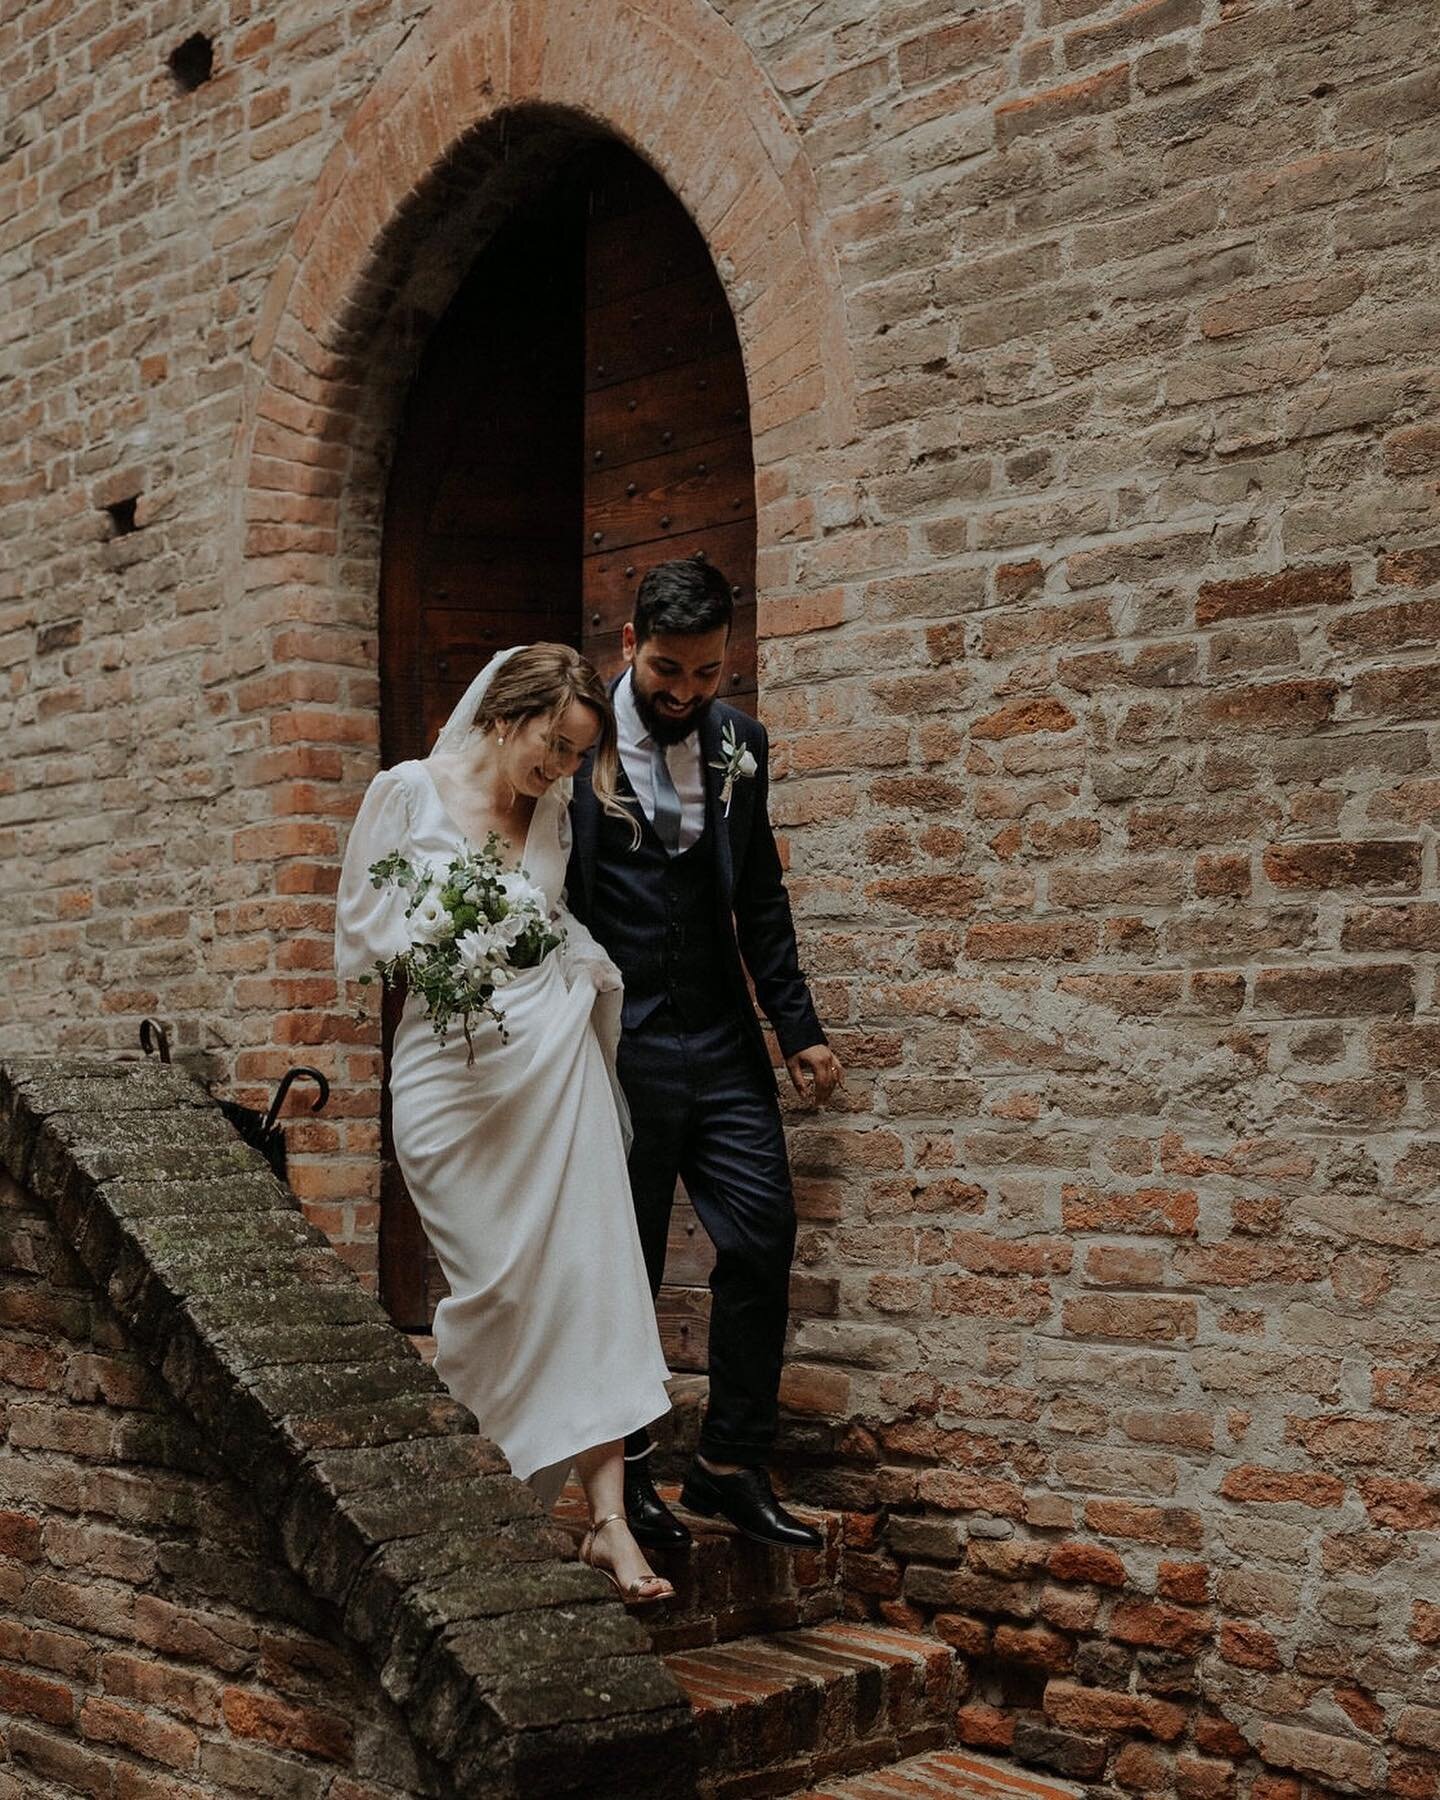 Married at a hilltop castle in Italy. Heather &amp; Stef and their dreamy destination wedding in Monforte d&rsquo;Alba are fresh on the blog. Link in bio. 
.
Venue: @hotel_villa_beccaris
Planner: @winewedsandmore
Dress: @charlie_brear
.
.
.
#corinnaa